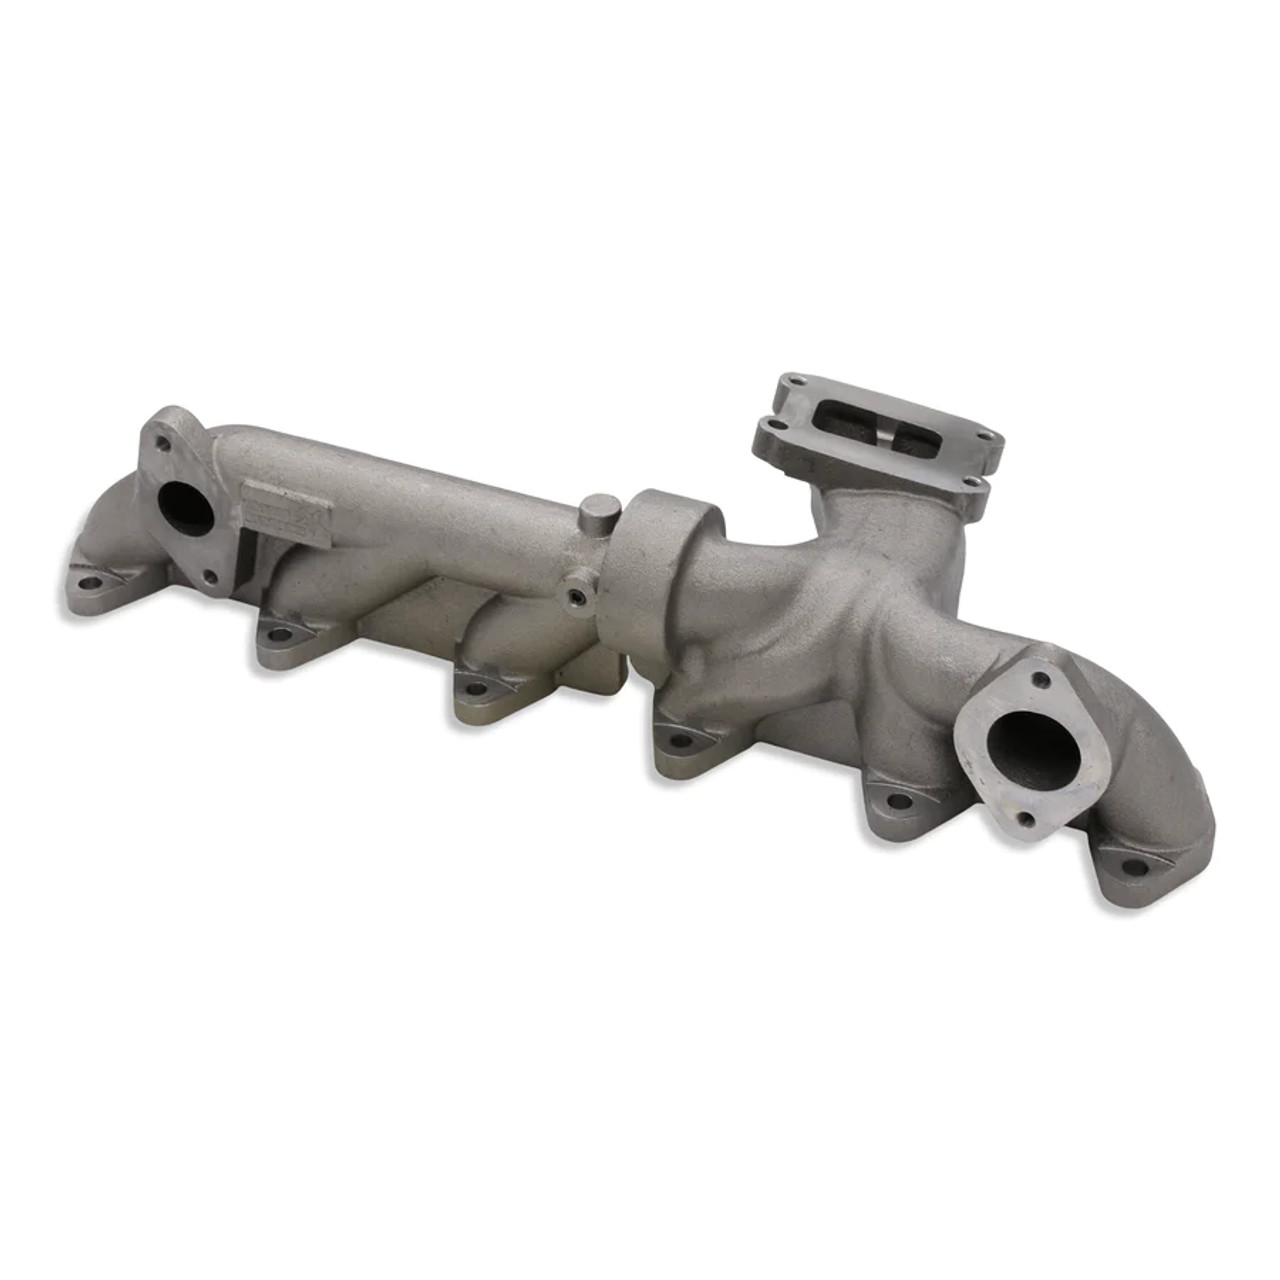  Smeding Diesel 2 Piece OEM Replacement Exhaust Manifold for 2019 to 2022 Dodge 6.7L Cummins (SD_2P_EM) Main View